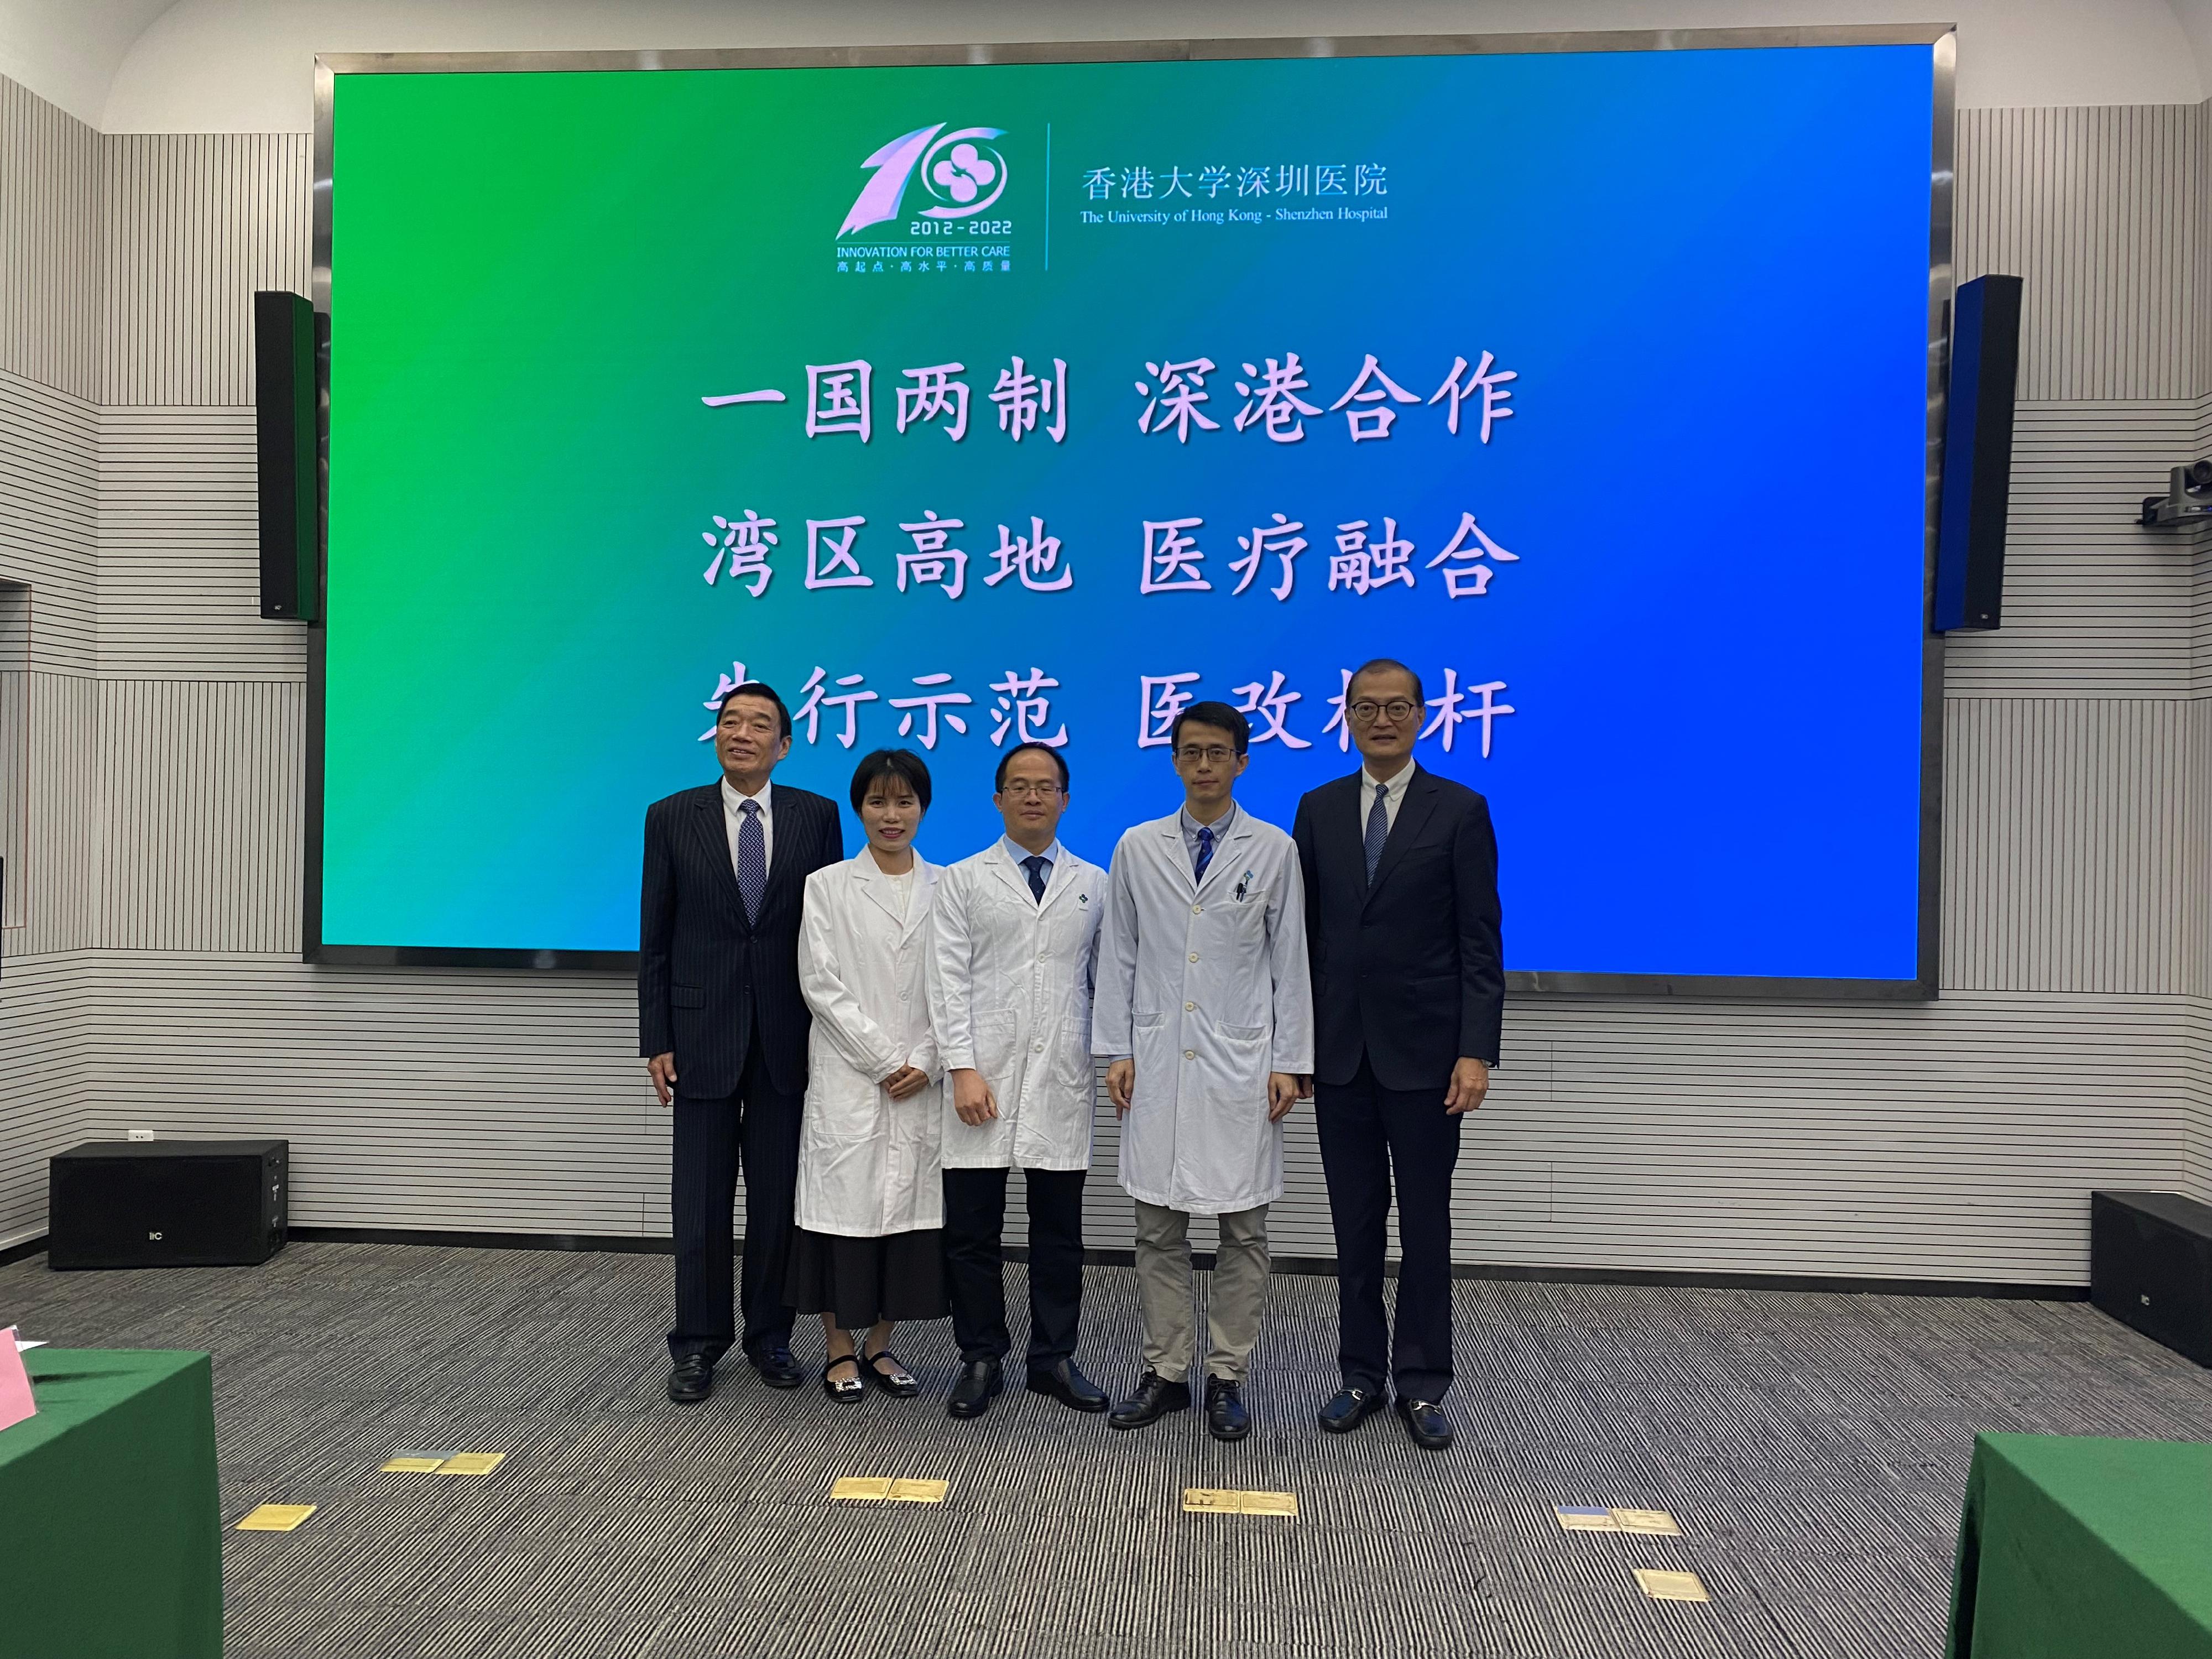 The Secretary for Health, Professor Lo Chung-mau, and his delegation visited the University of Hong Kong - Shenzhen Hospital (HKU-SZH) this afternoon (March 31). Photo shows Professor Lo (first right); the Chairman of the Hospital Authority, Mr Henry Fan (first left); and three doctors of the HKU-SZH who assisted Hong Kong in fighting the epidemic last year.